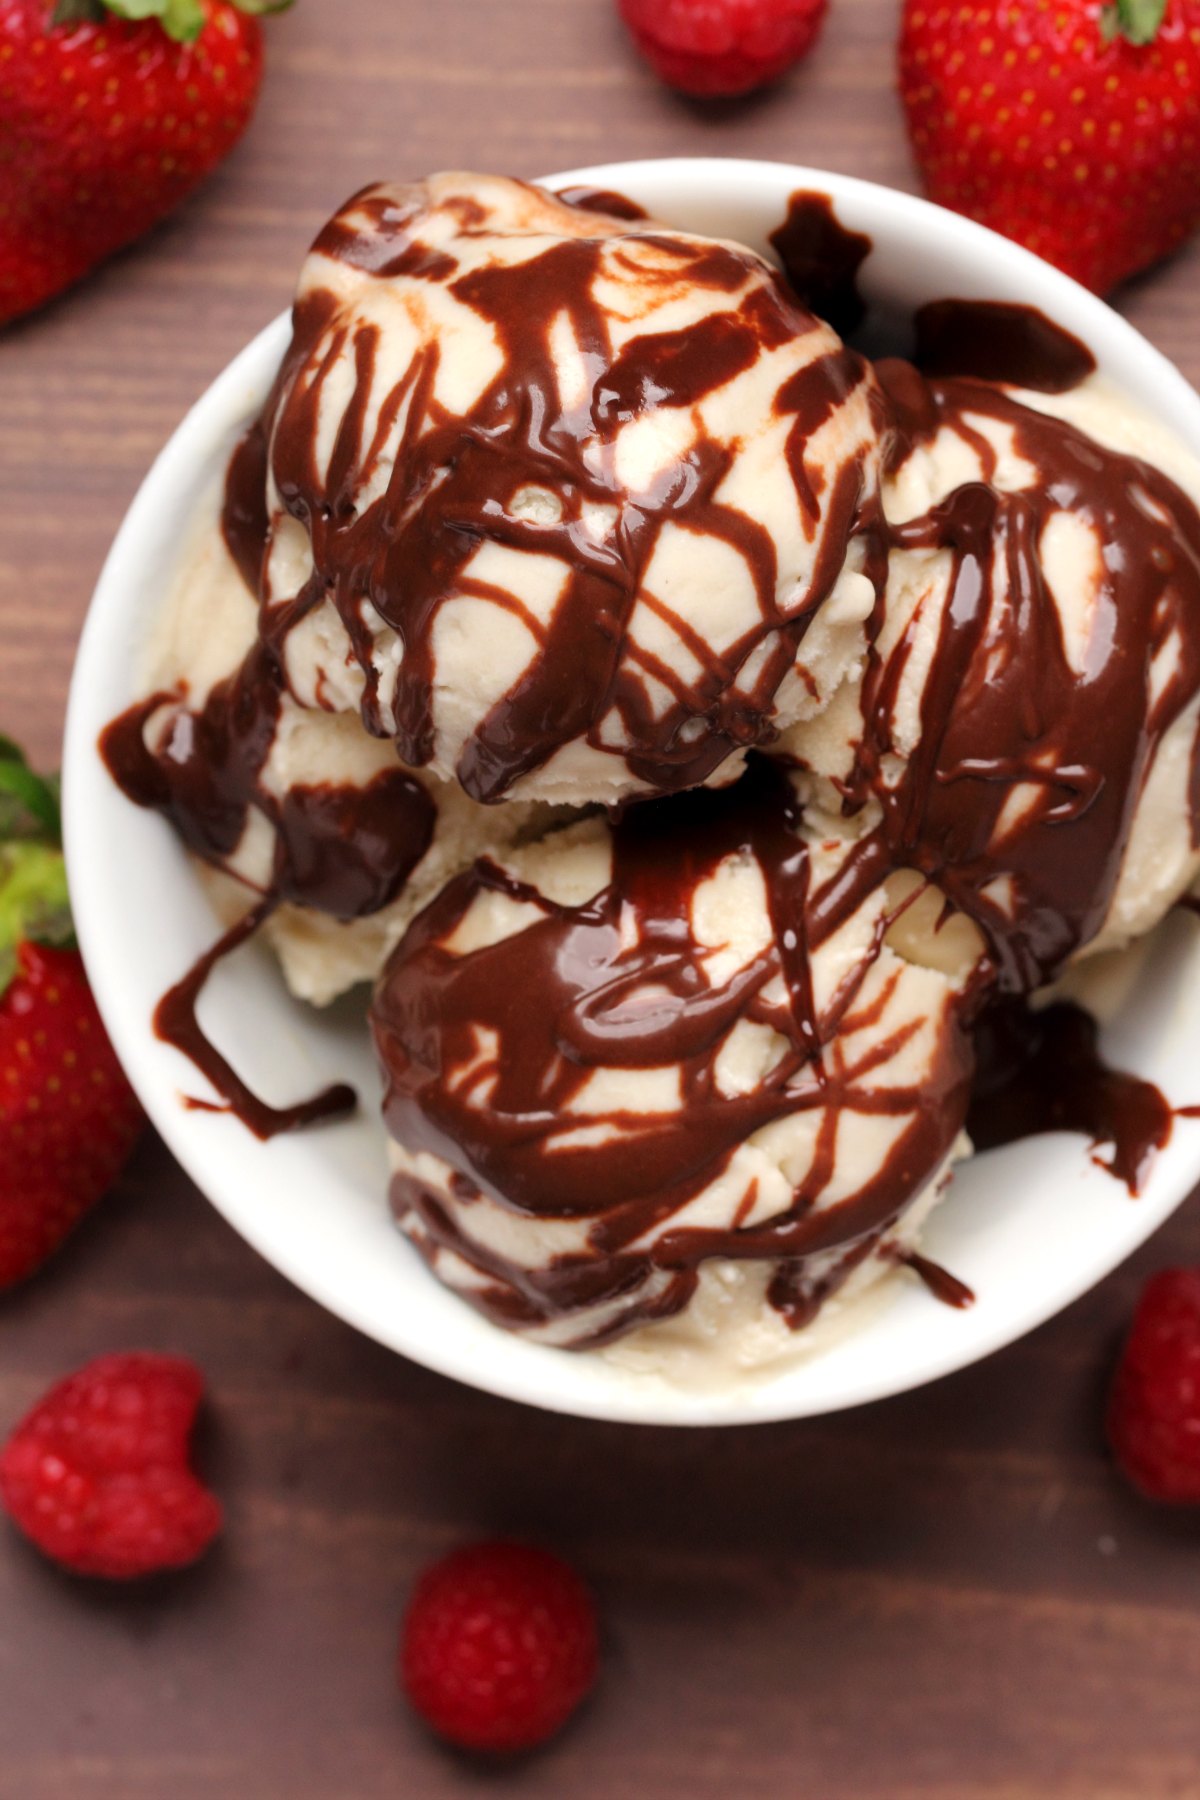 Ice cream drizzled with chocolate sauce in a white bowl. 